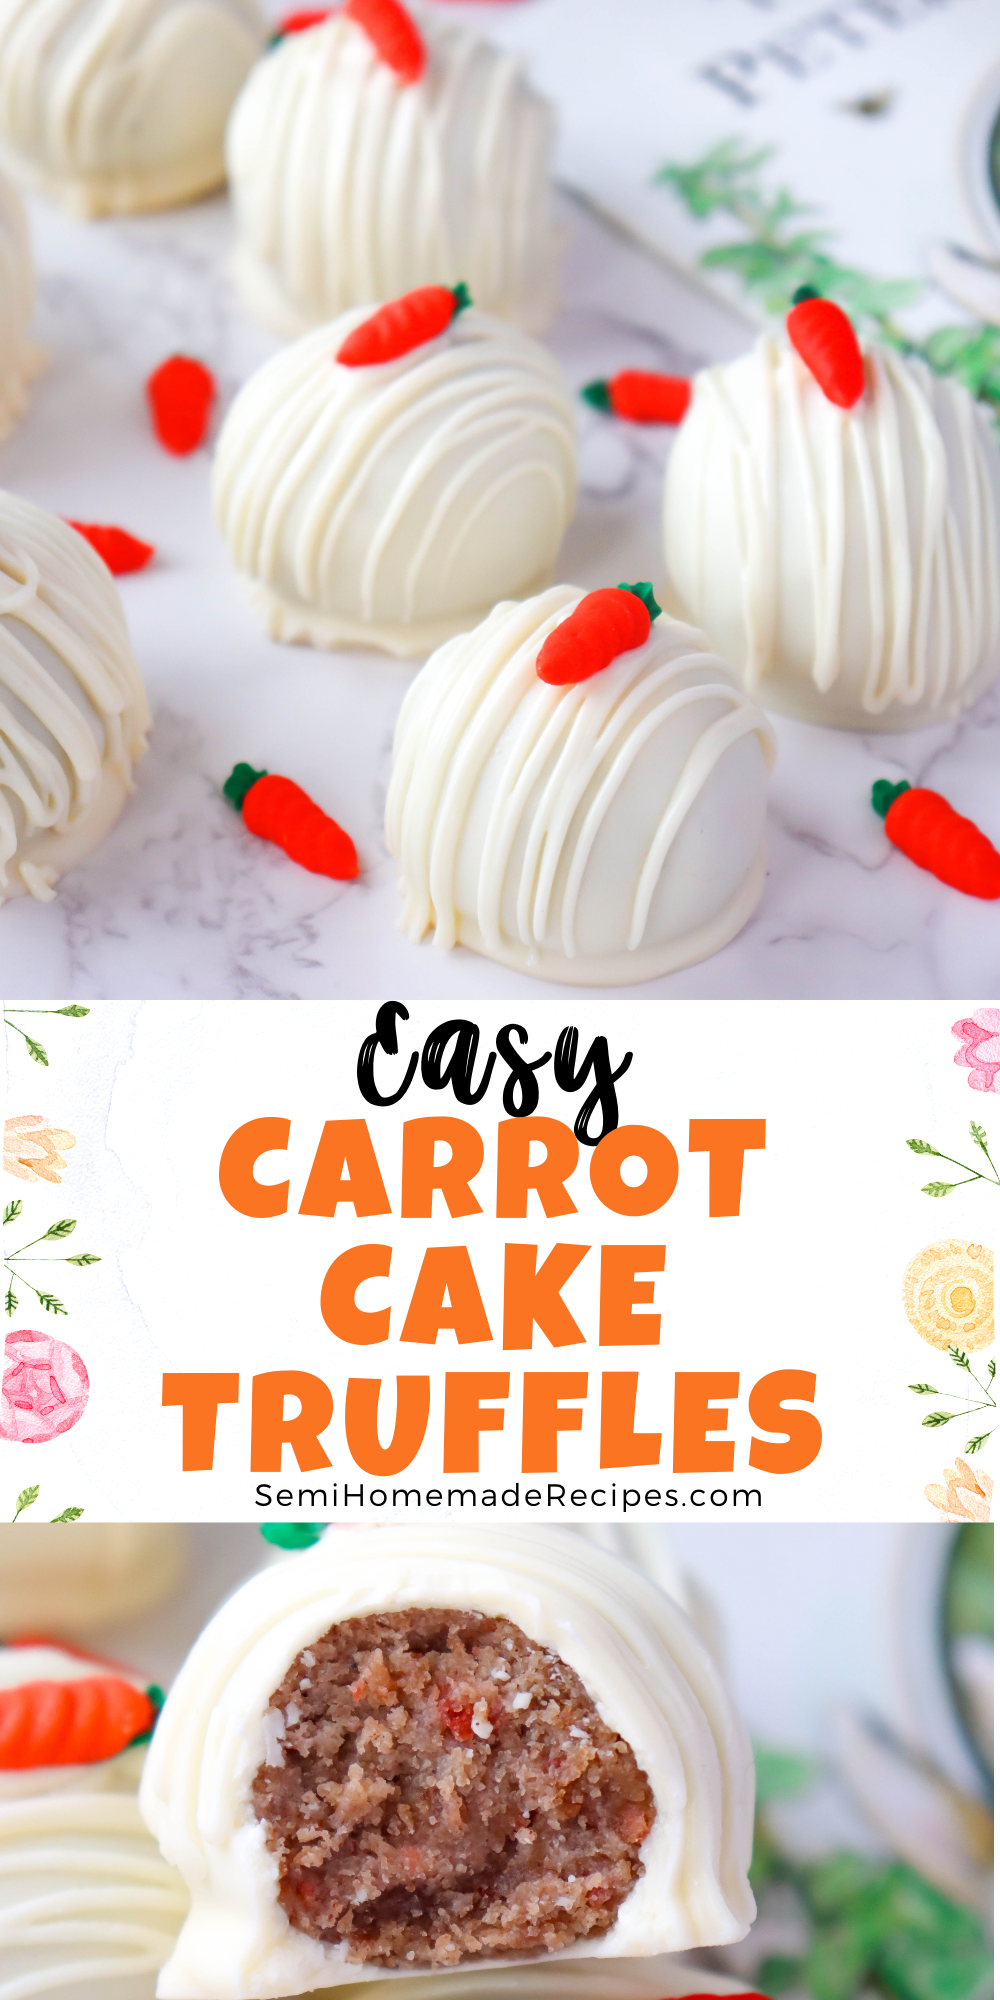 These super Easy Carrot Cake Truffles are made with carrot cake, white chocolate and decorated with a cute royal icing carrot on top! Perfect for Easter dessert, church potlucks, or any springtime party!